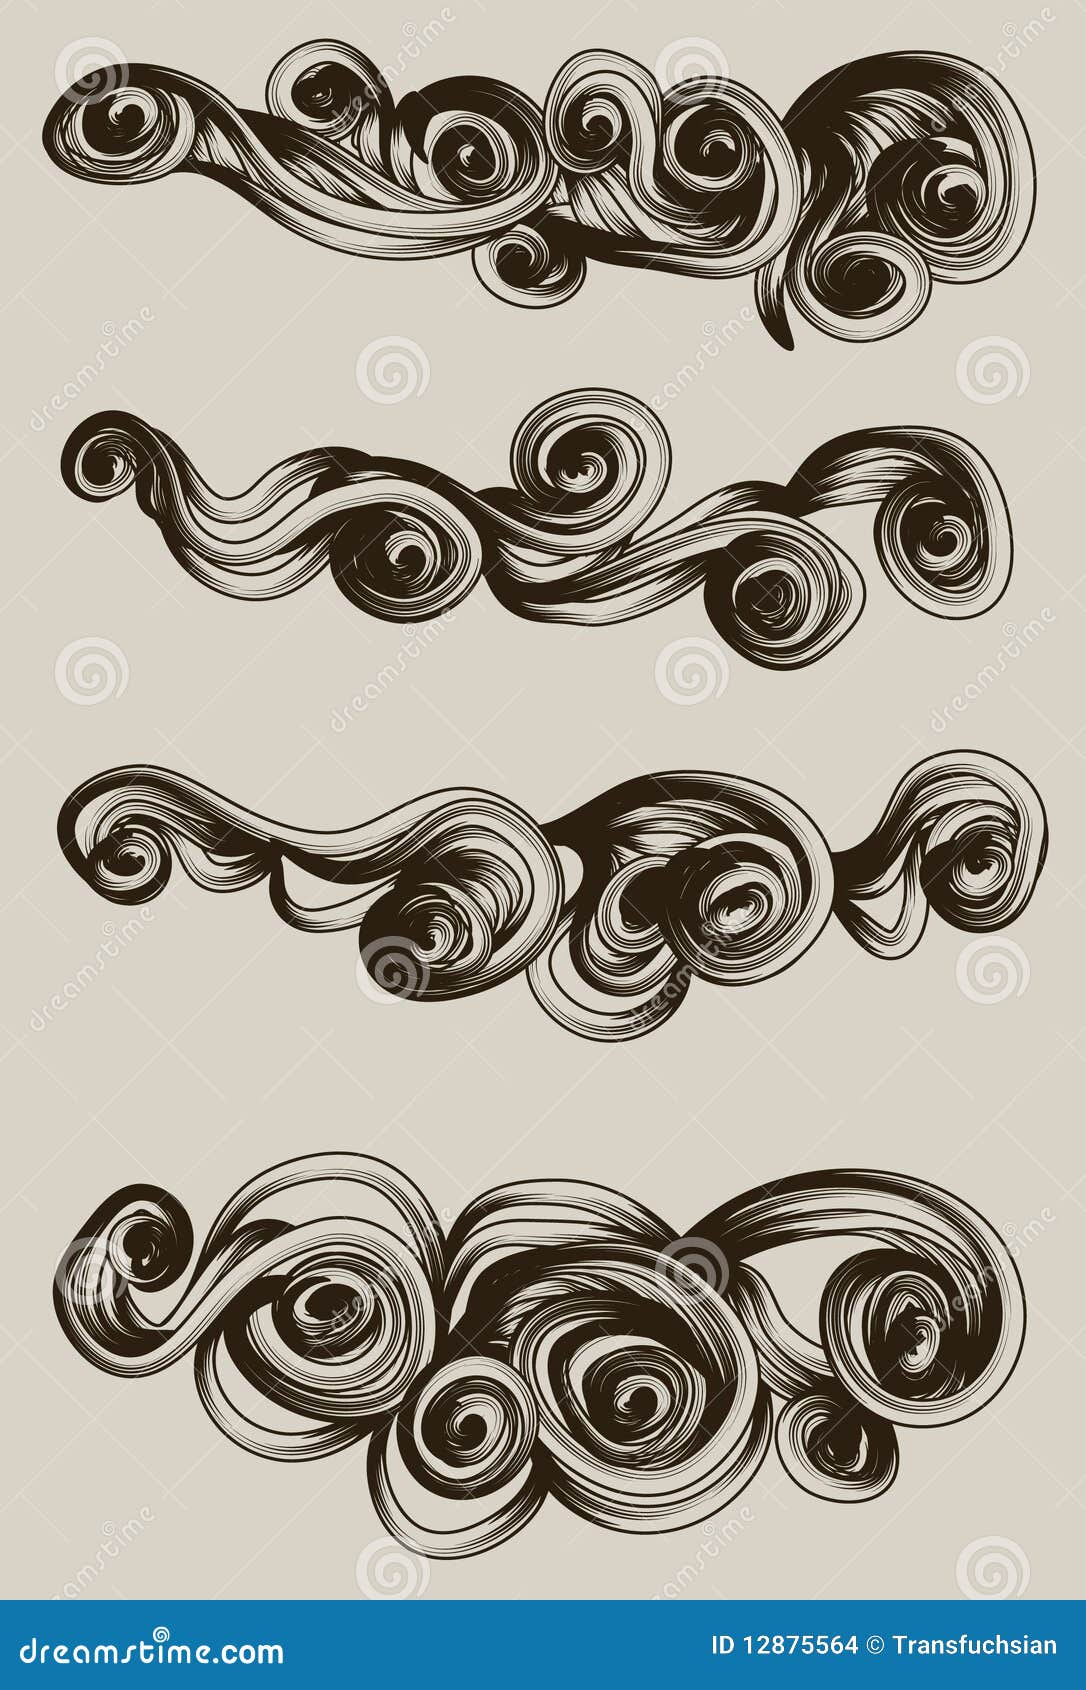 Abstract Hand Drawn Cloud Collection Stock Vector - Image 